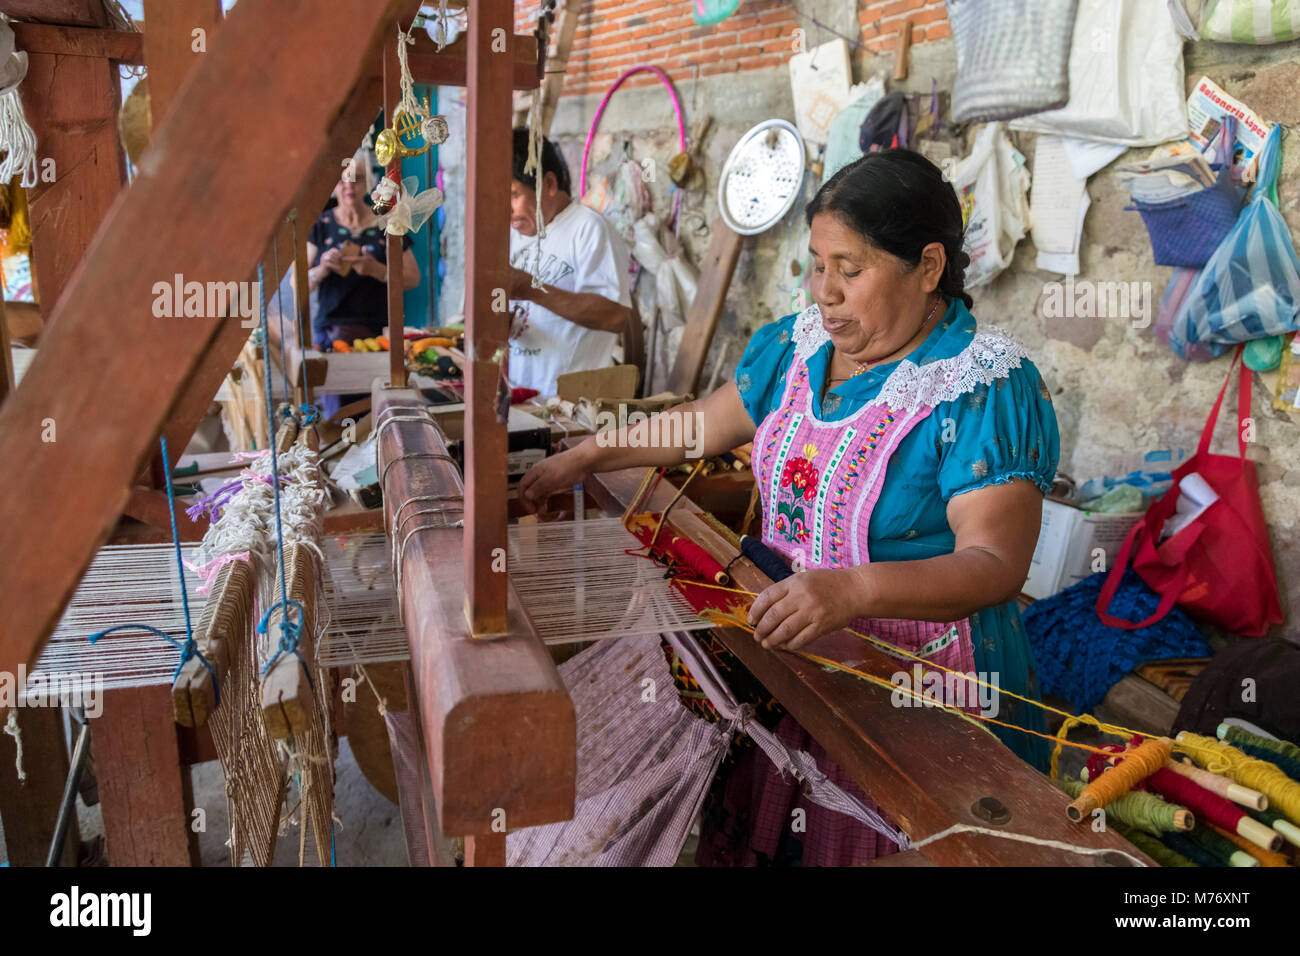 San Miguel del Valle, Oaxaca, Mexico - Mexican women receive microfinance loans from the nonprofit En Via to support their small businesses. Marina He Stock Photo